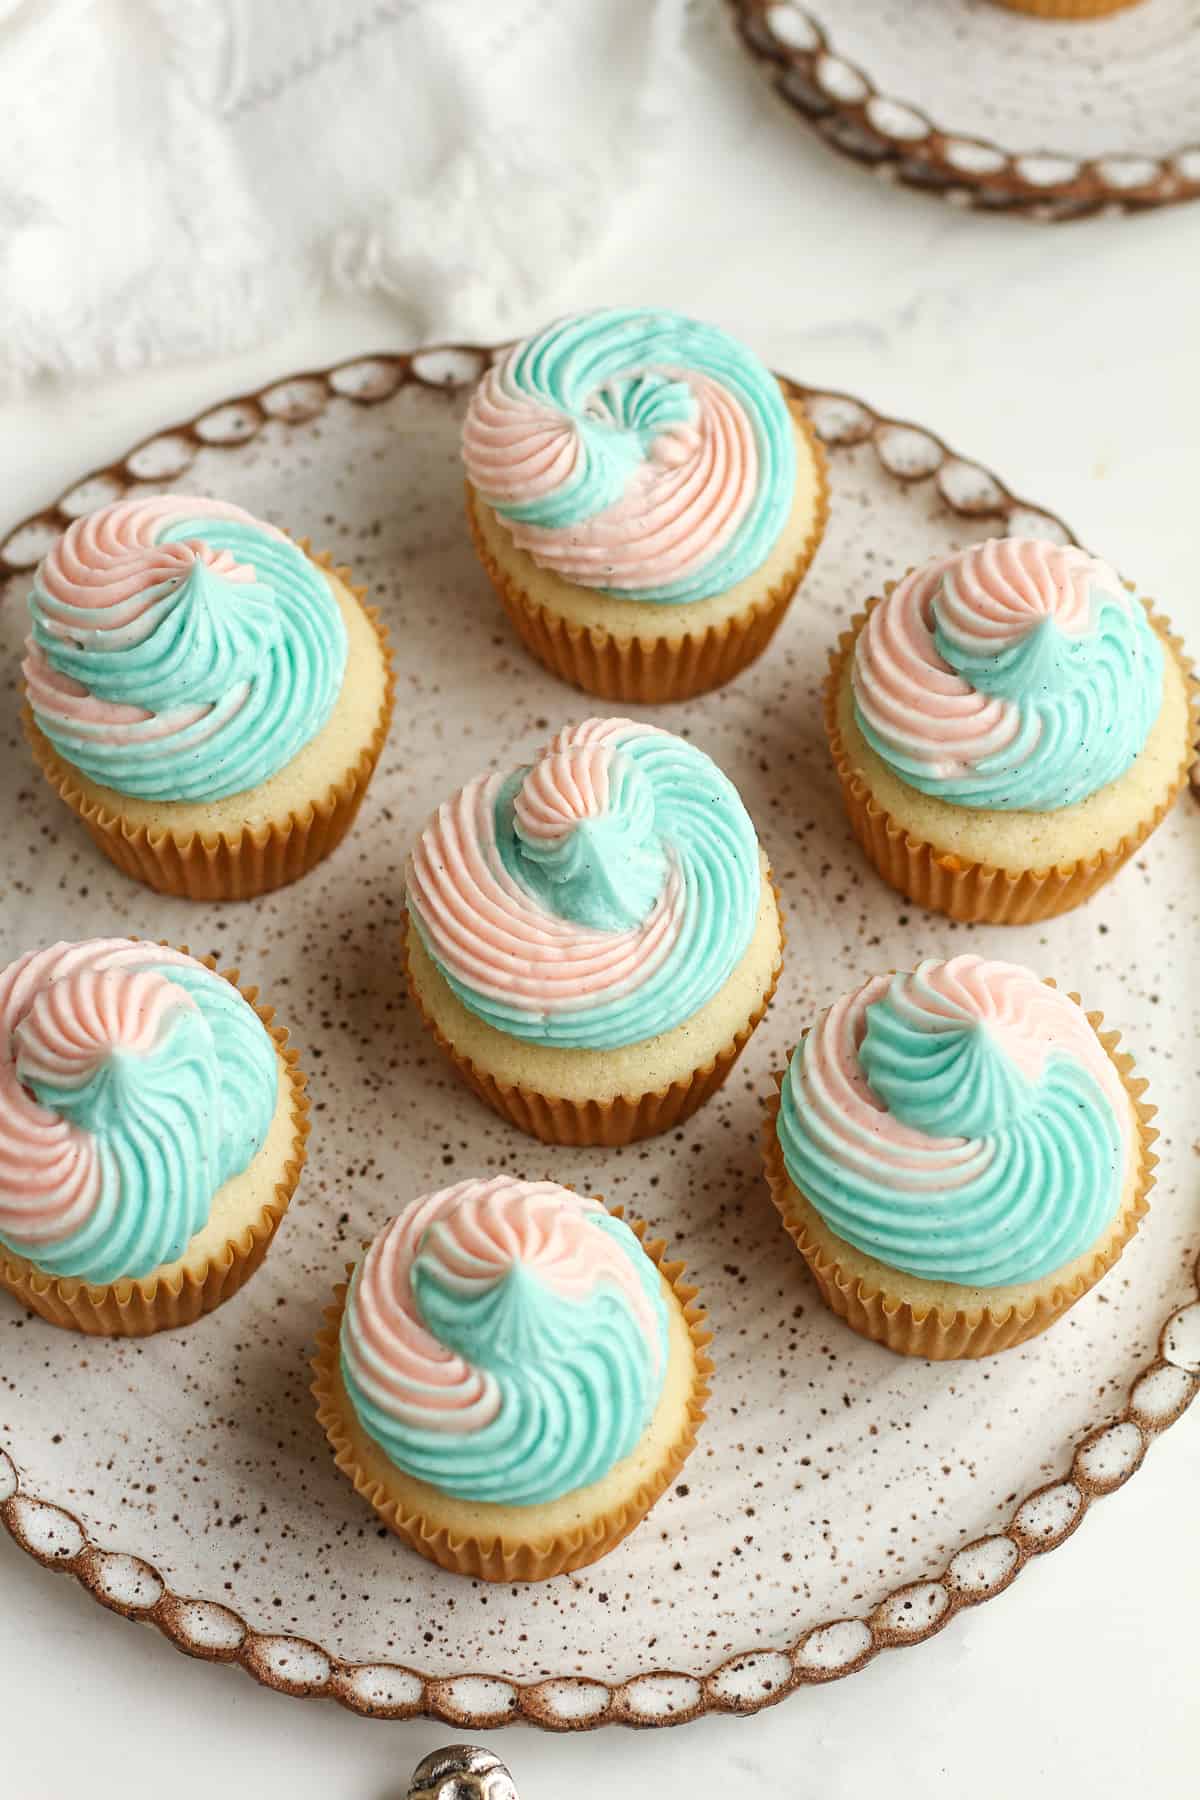 Side shot of a plate of vanilla cupcakes with swirl buttercream.